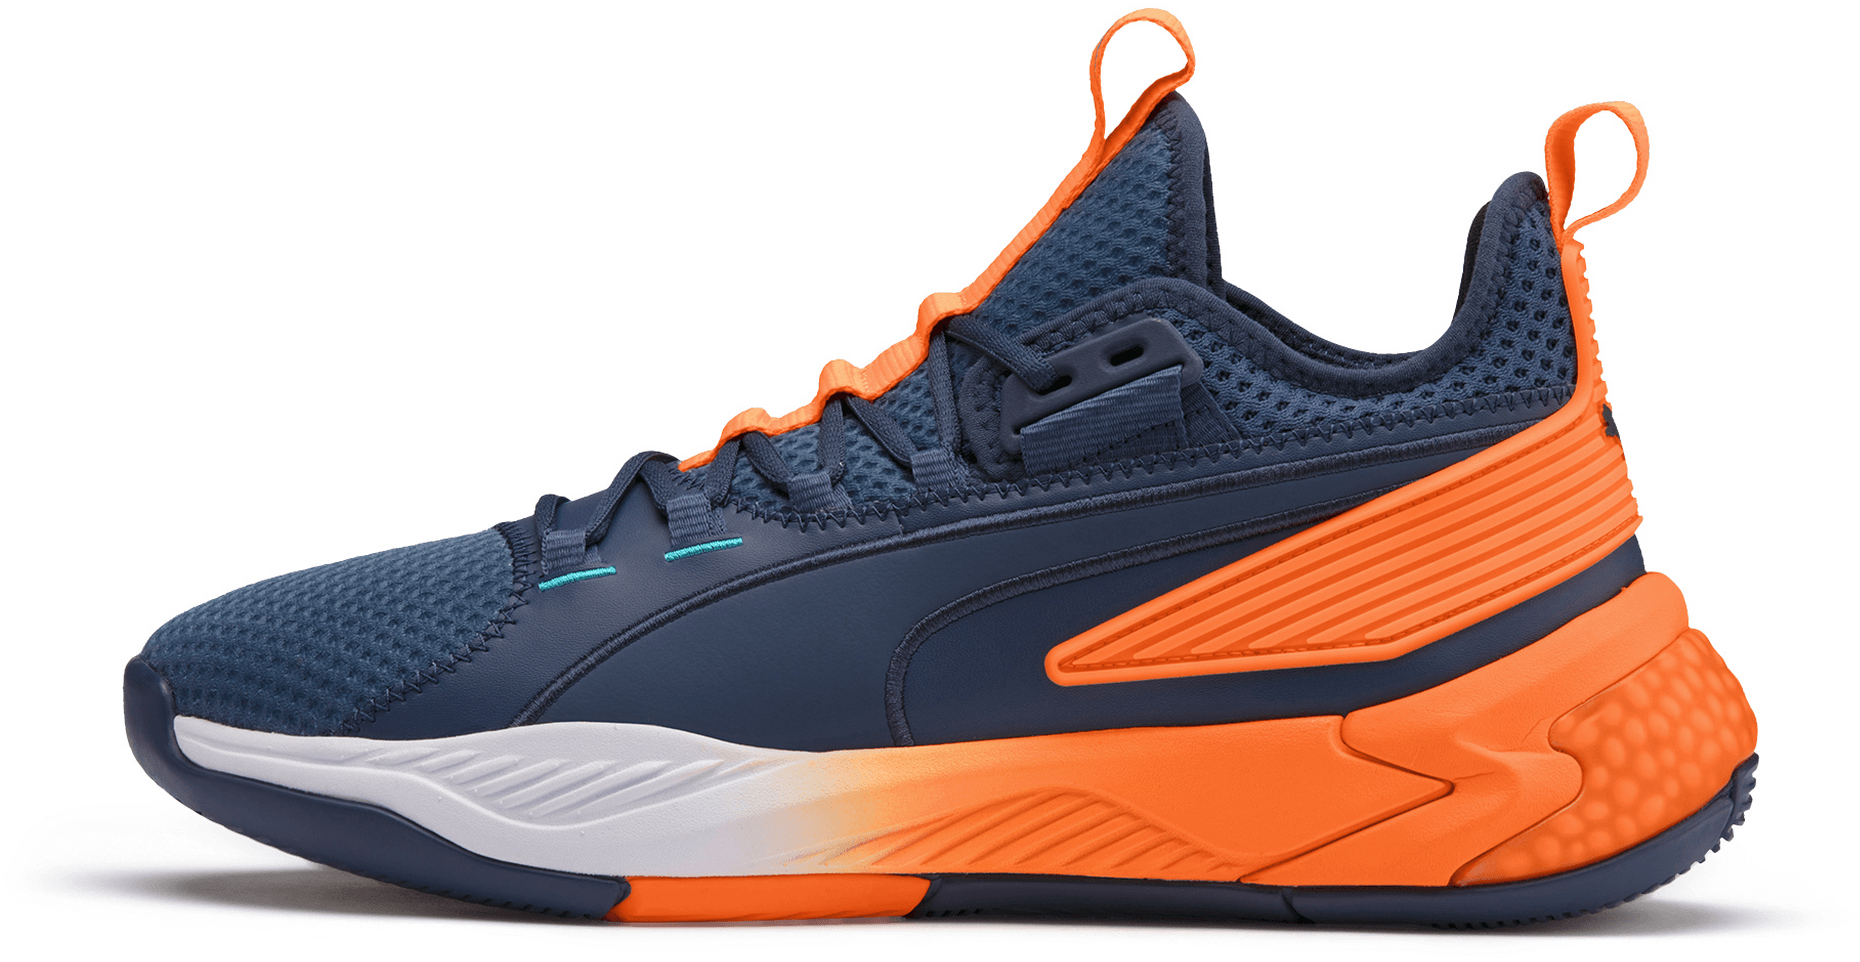 Best Puma Basketball Shoes - 15 Shoes starting from $48.57